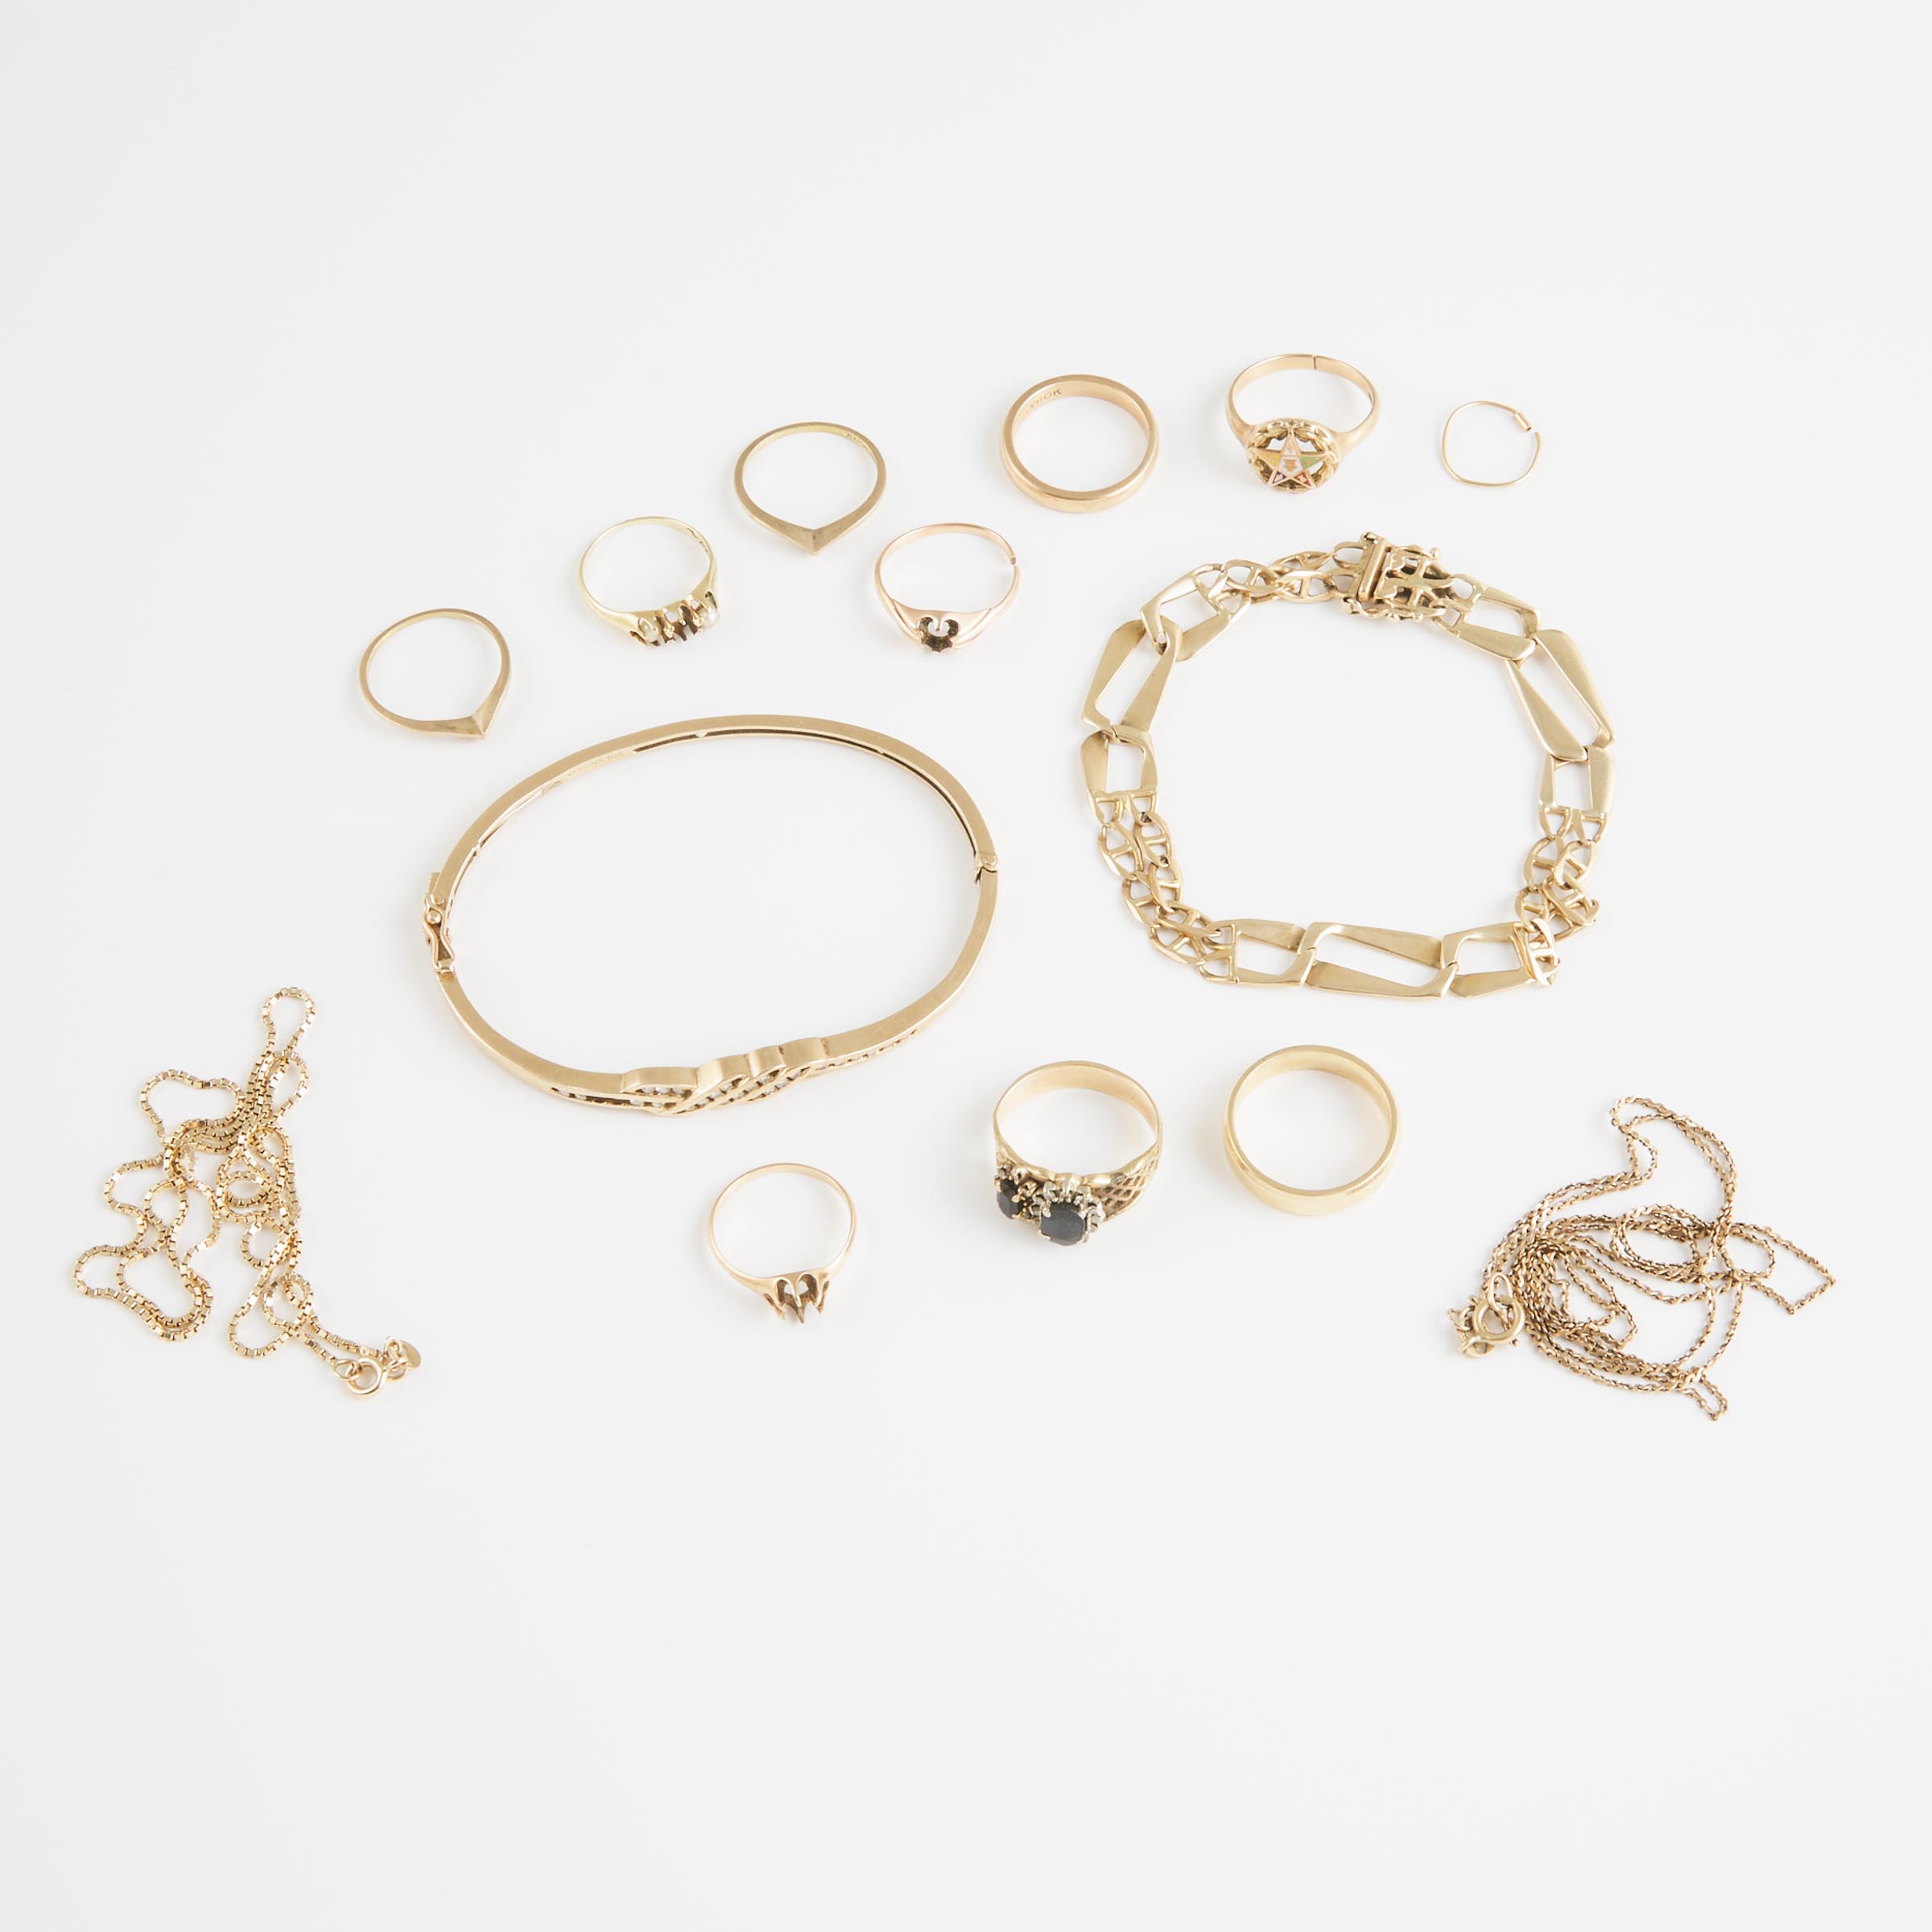 Group Of Gold Jewellery